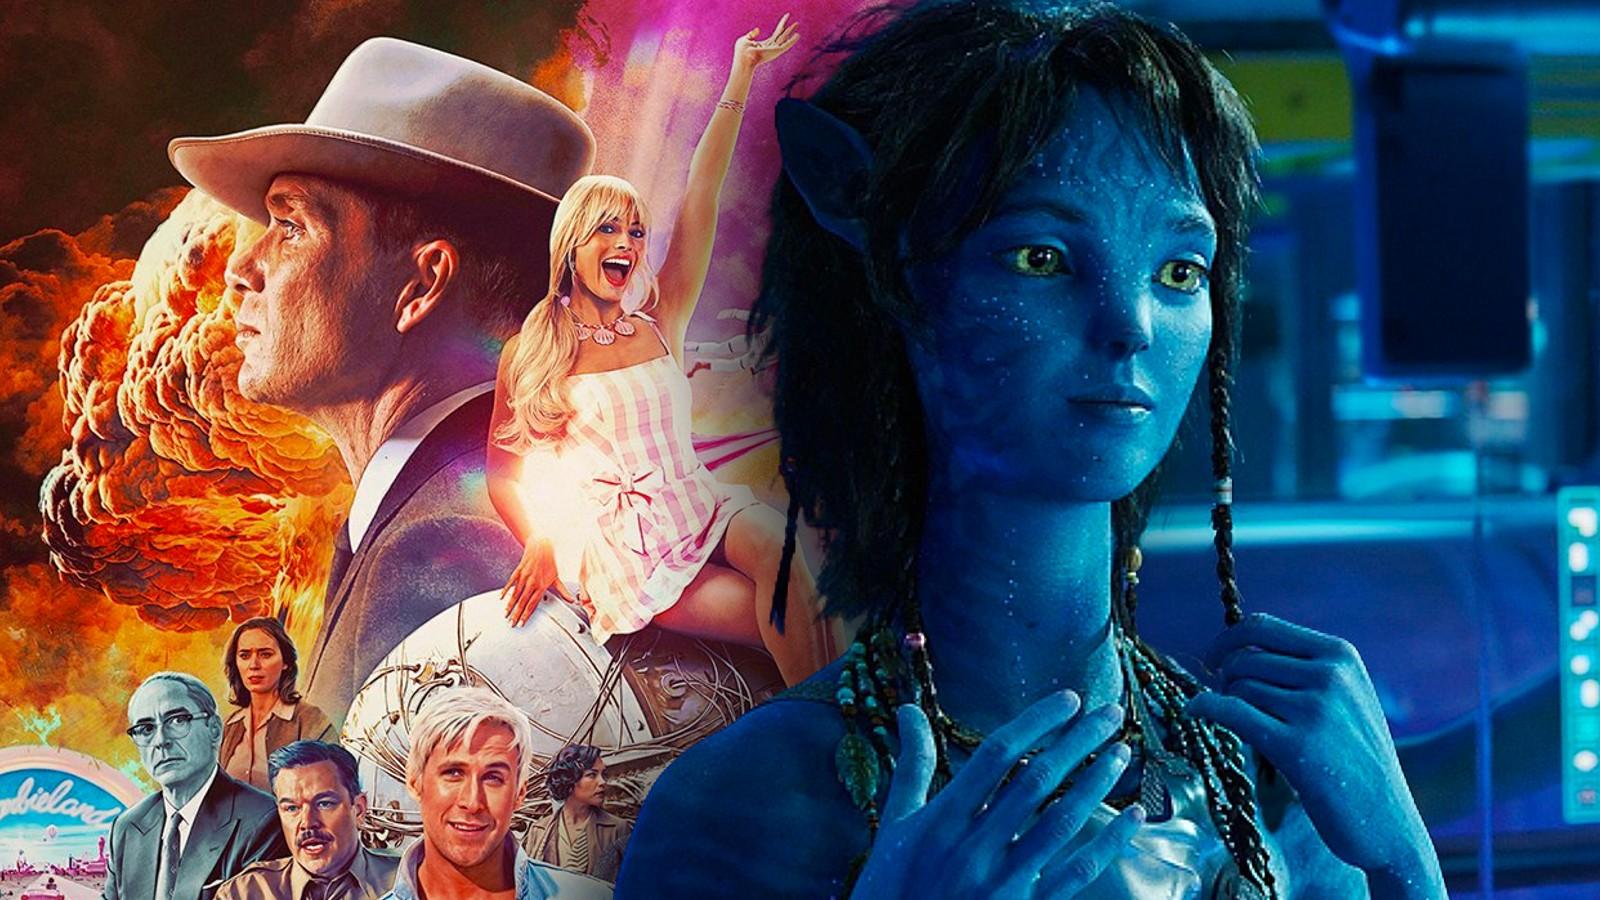 A poster for Barbenheimer (Barbie and Oppenheimer) and a still from Avatar 2, one of the highest-grossing movies of all time